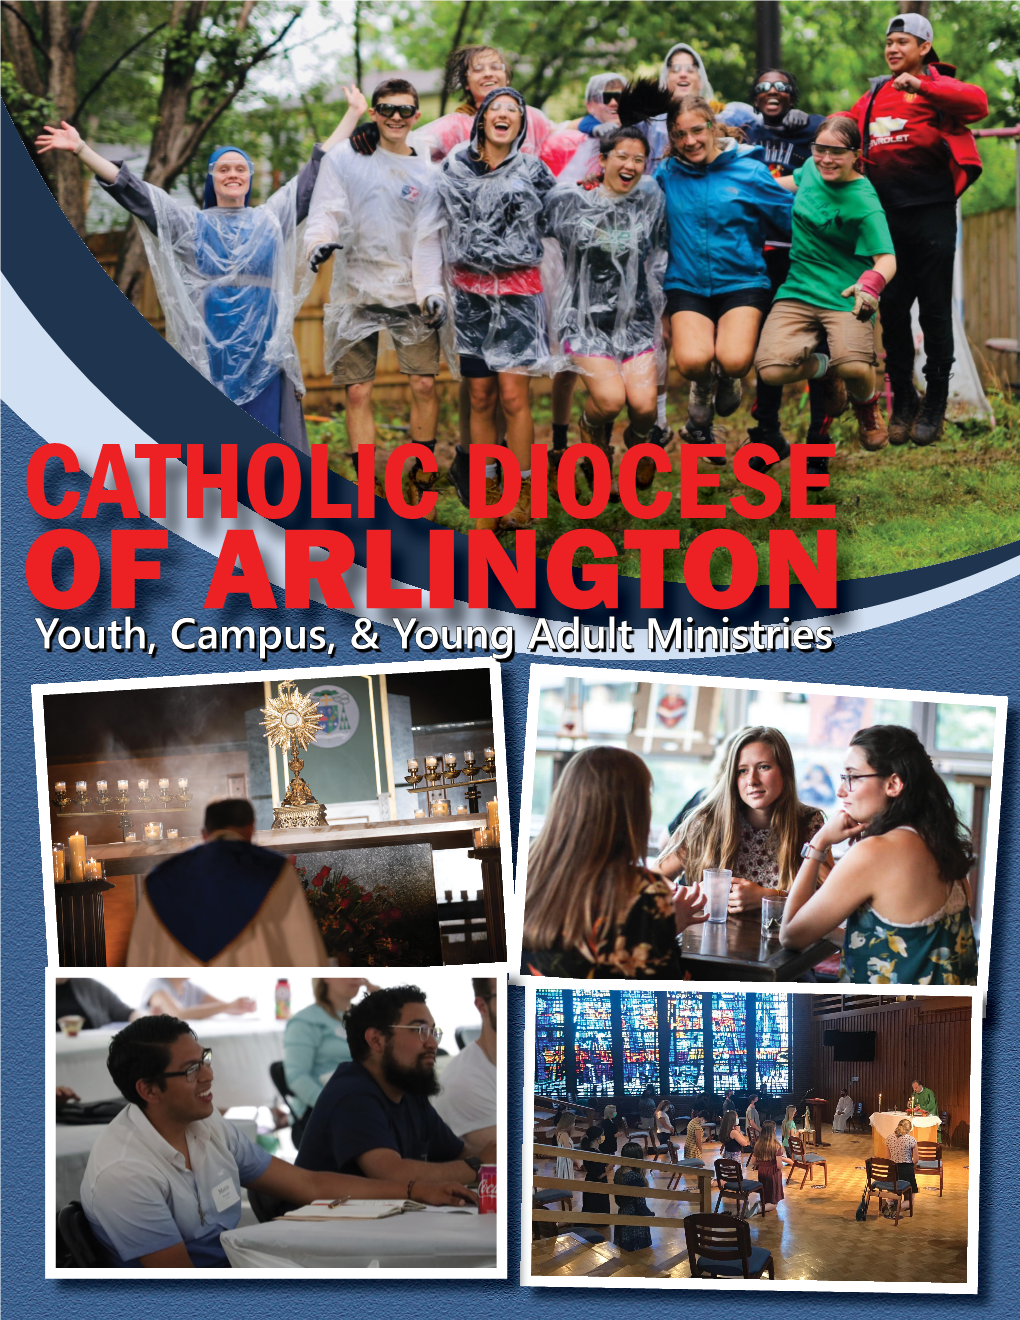 Office of Youth, Campus, & Young Adult Ministries Brochure